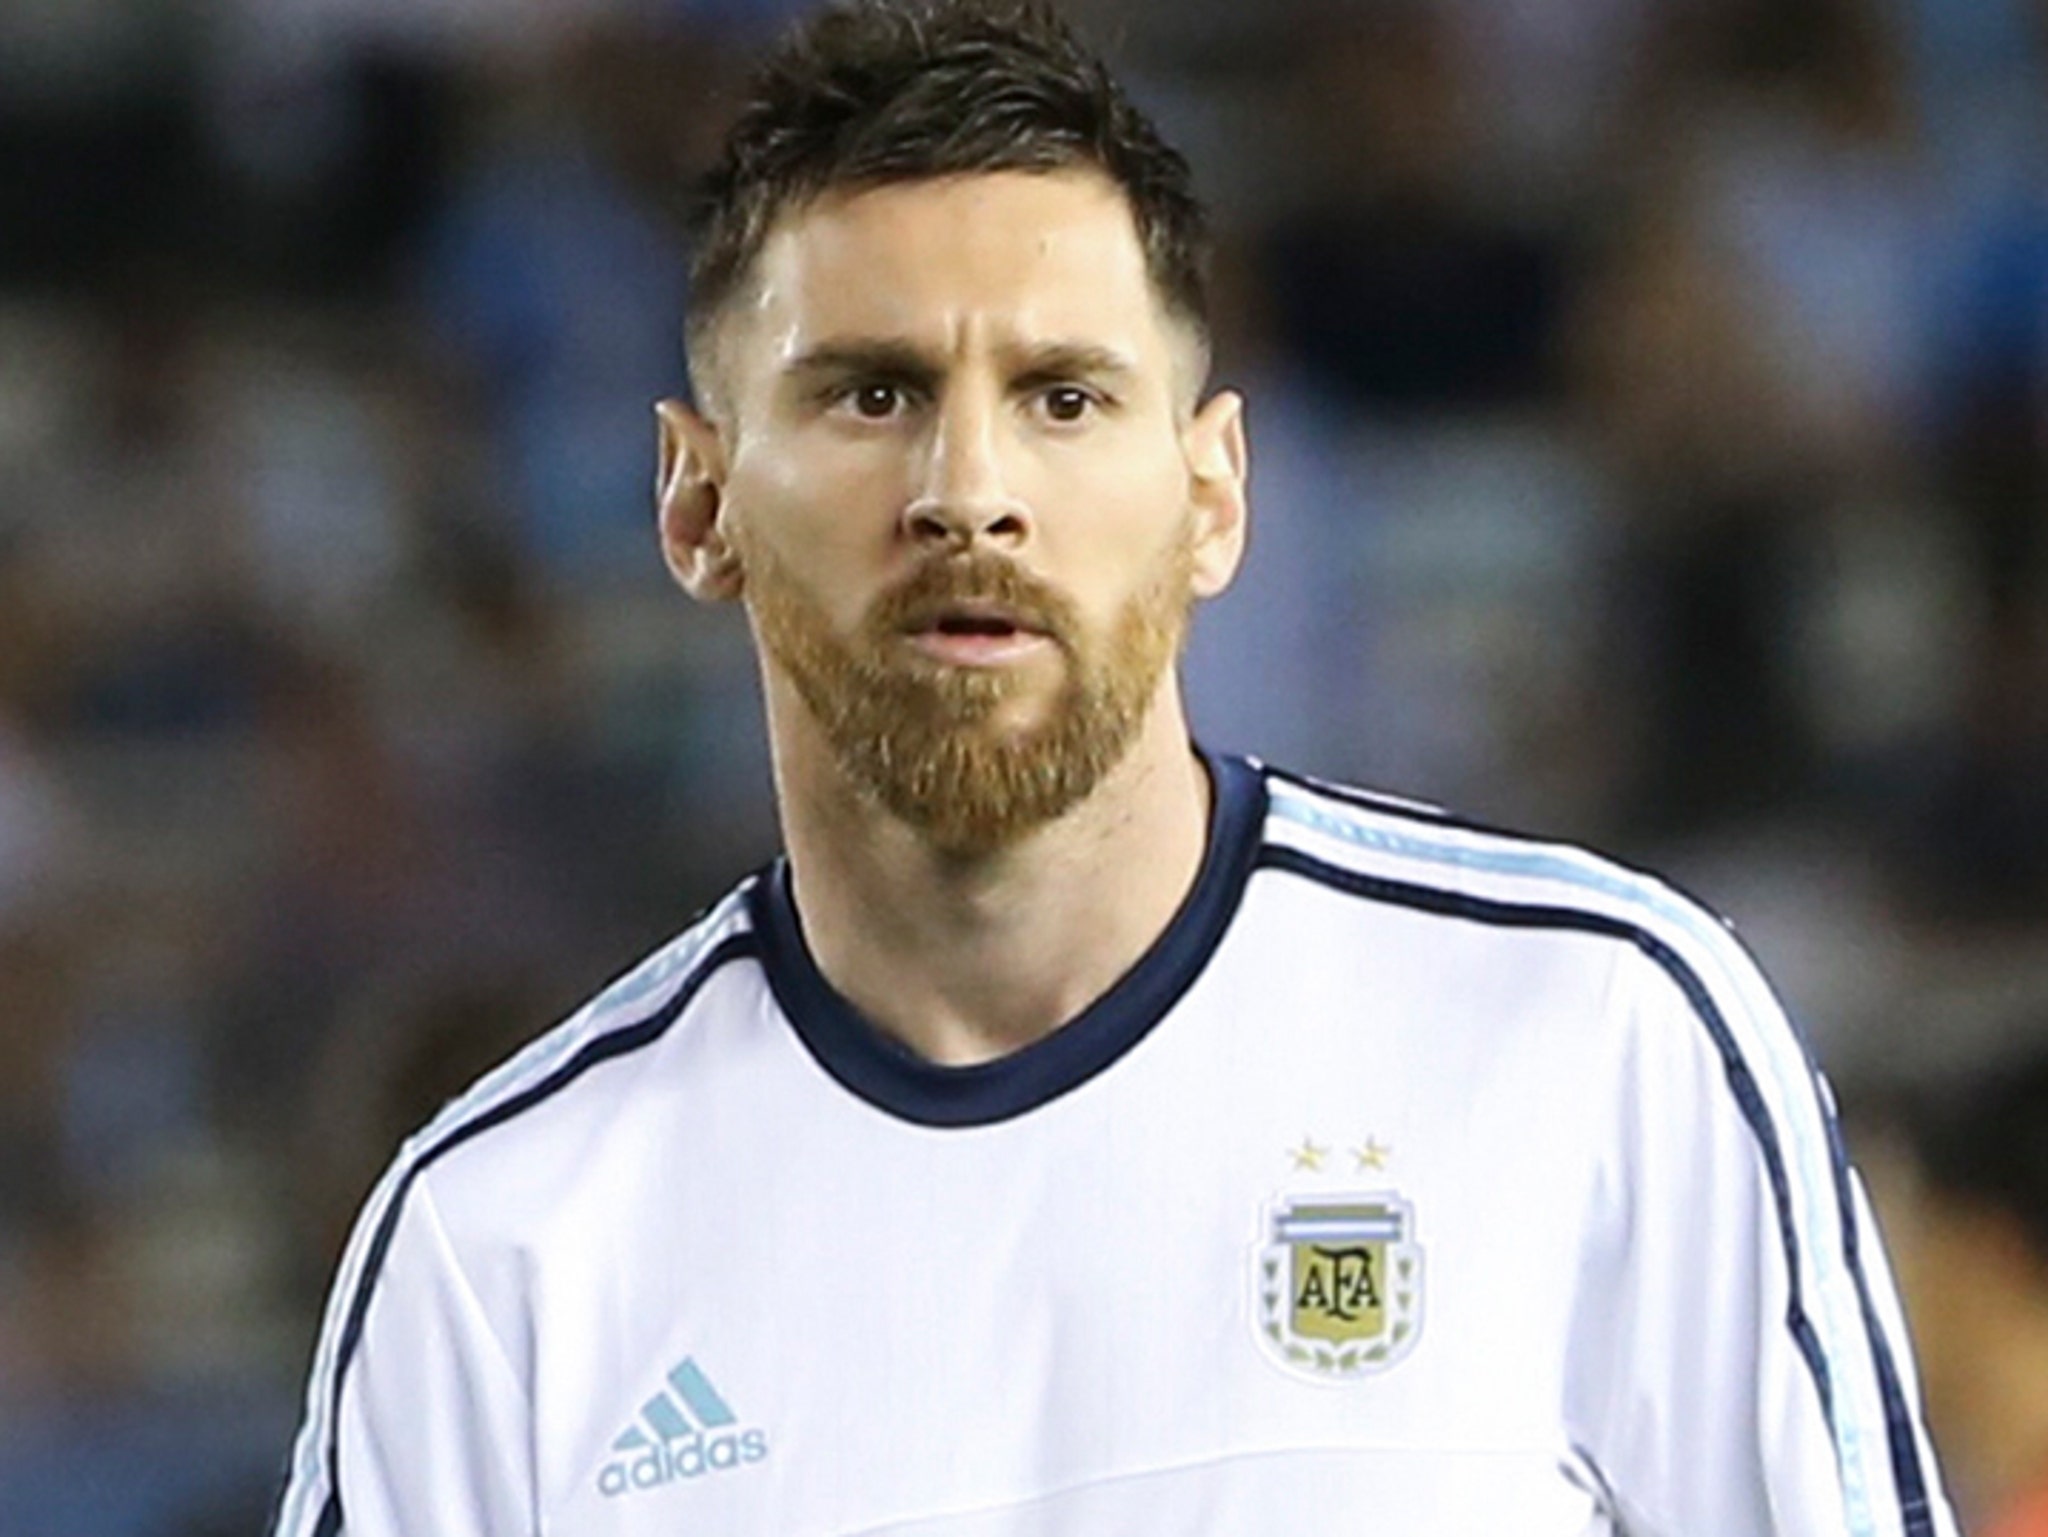 I think Bachira's hairstyle is inspired by 2009 Leo Messi : r/BlueLock